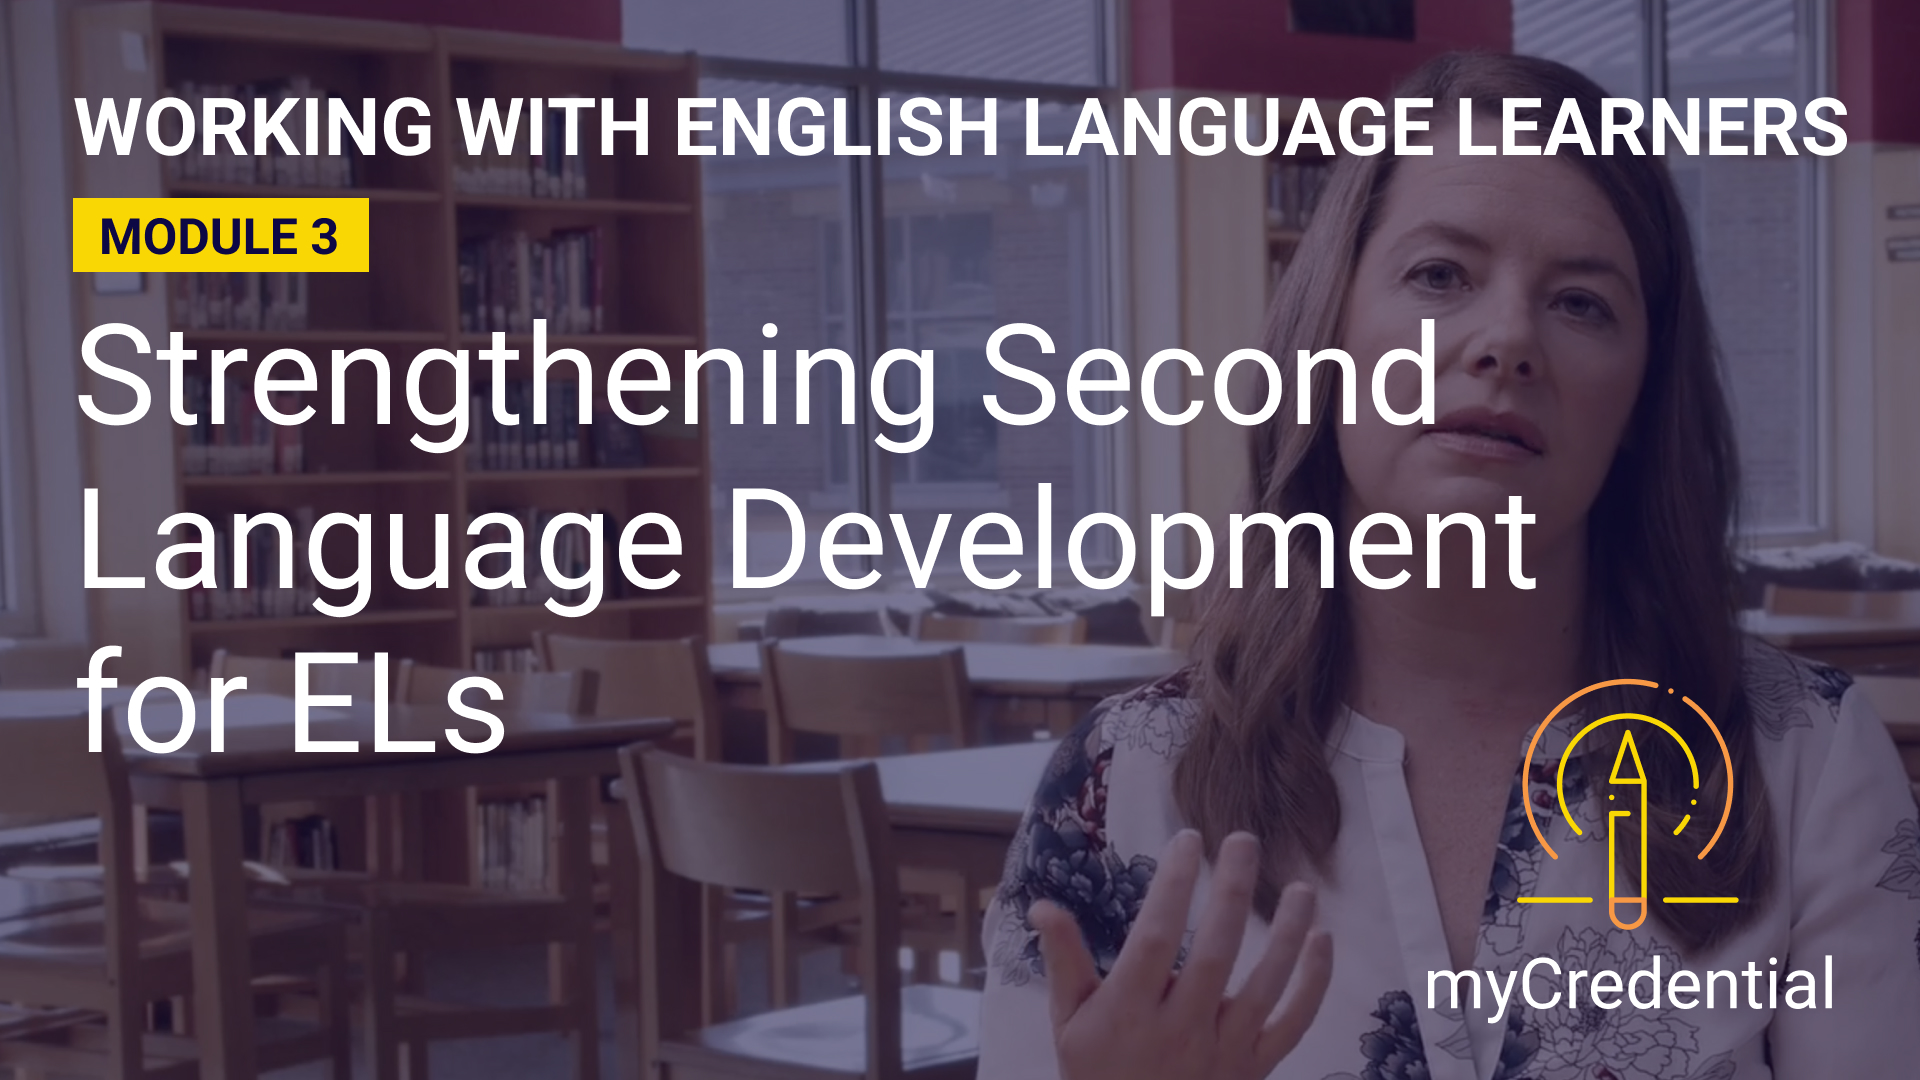 Working with English Language Learners (Unit 3): Strengthening Second Language Development for ELs